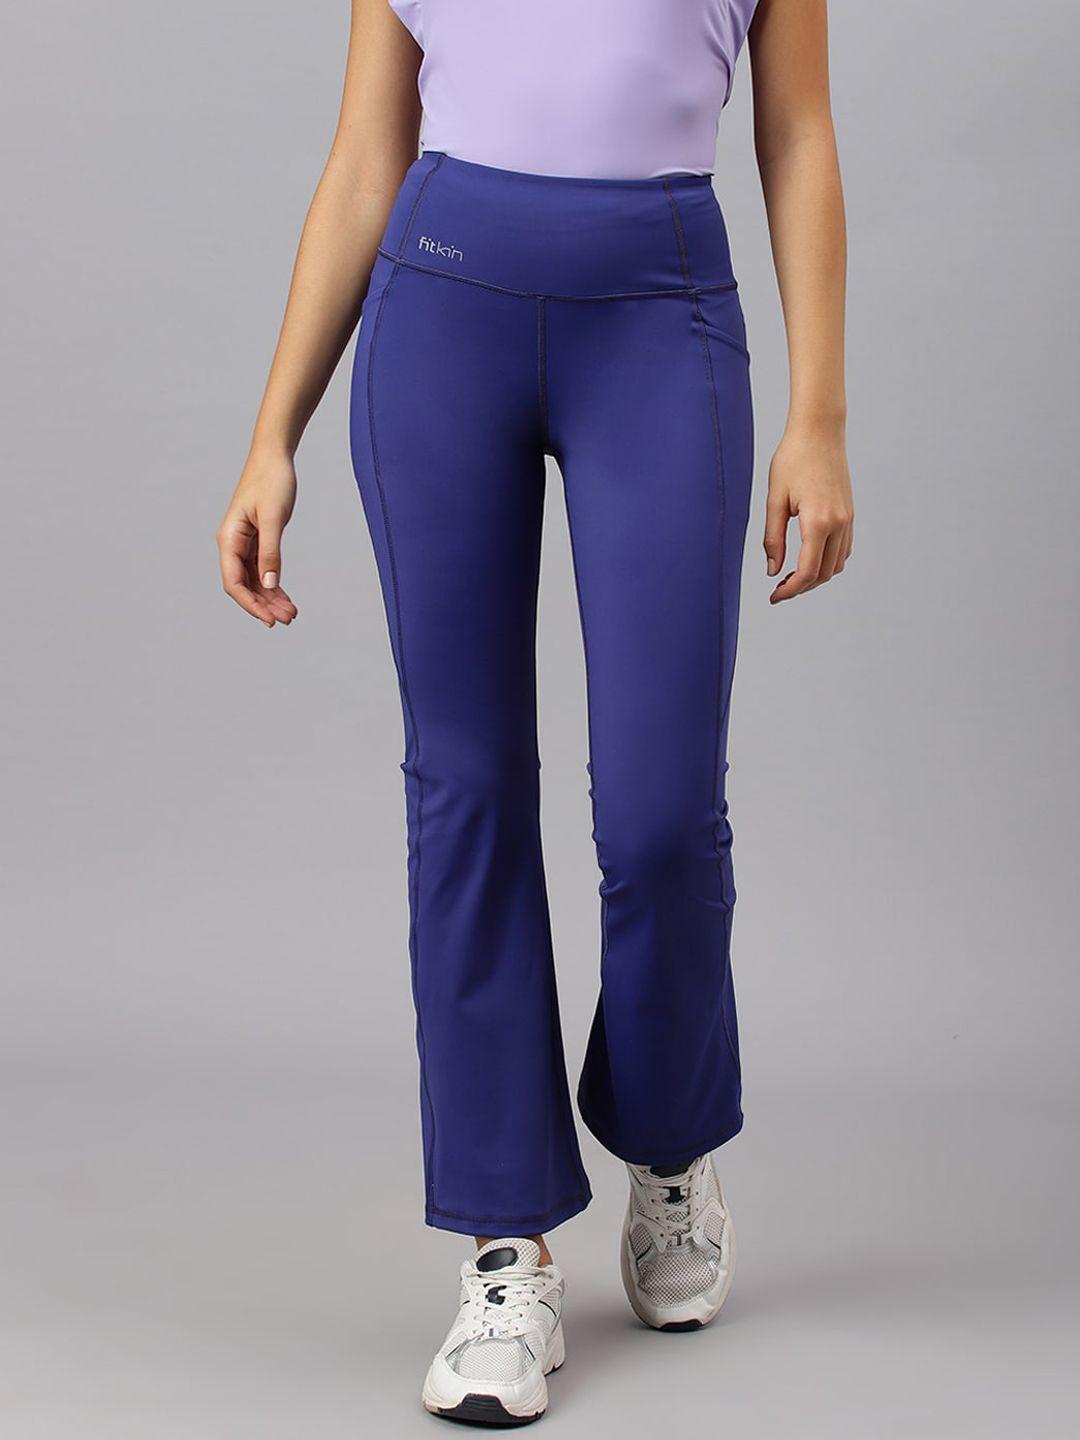 fitkin women bootcut track pants